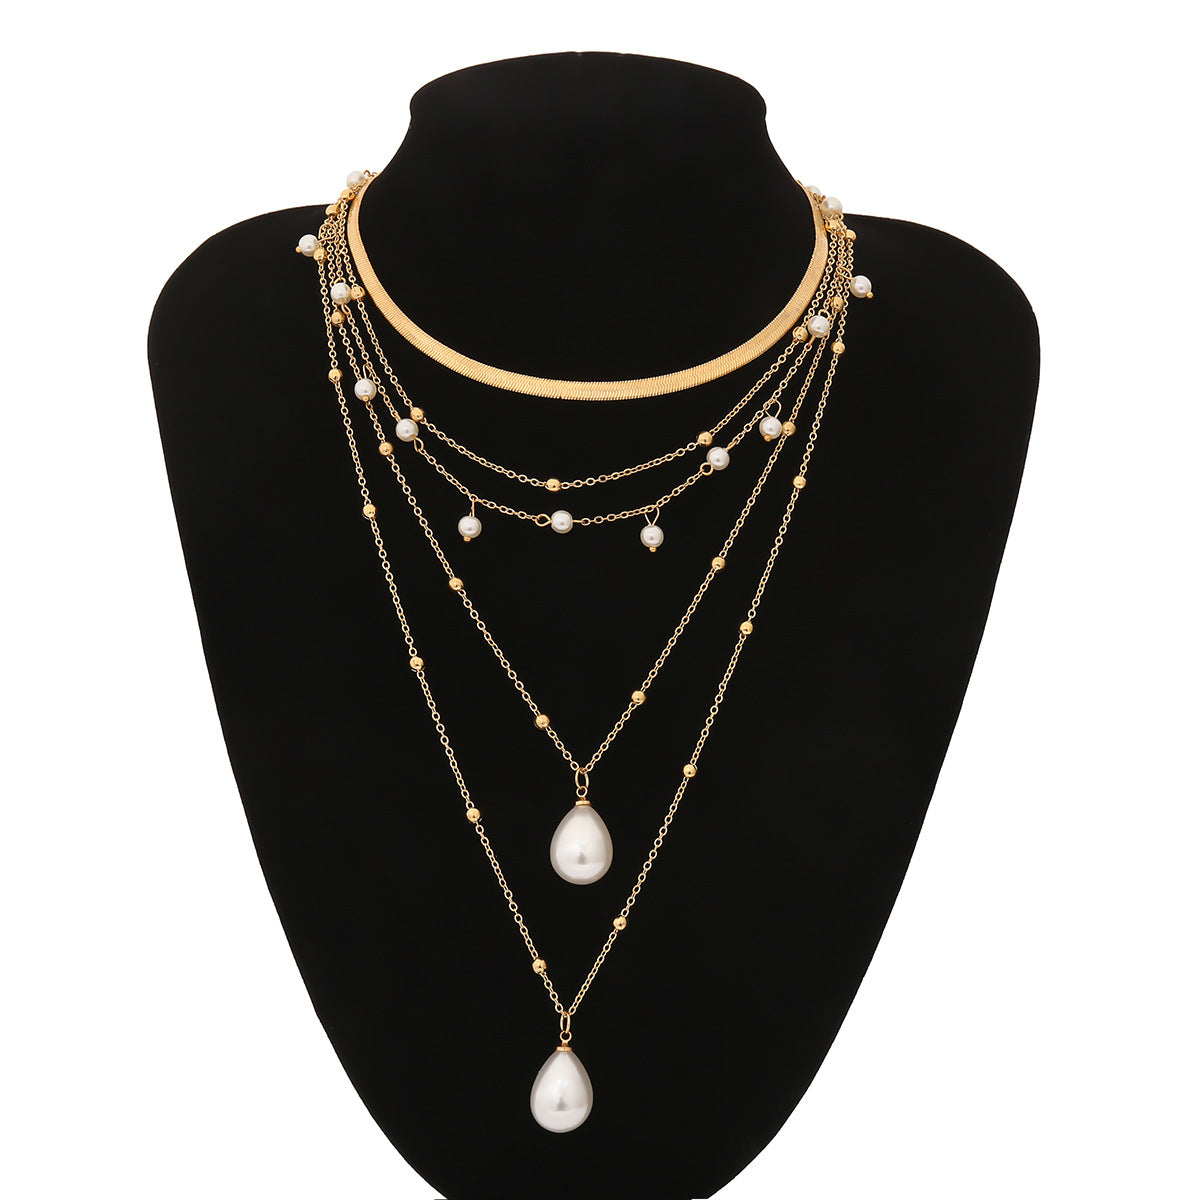 Multi-element pearl necklace